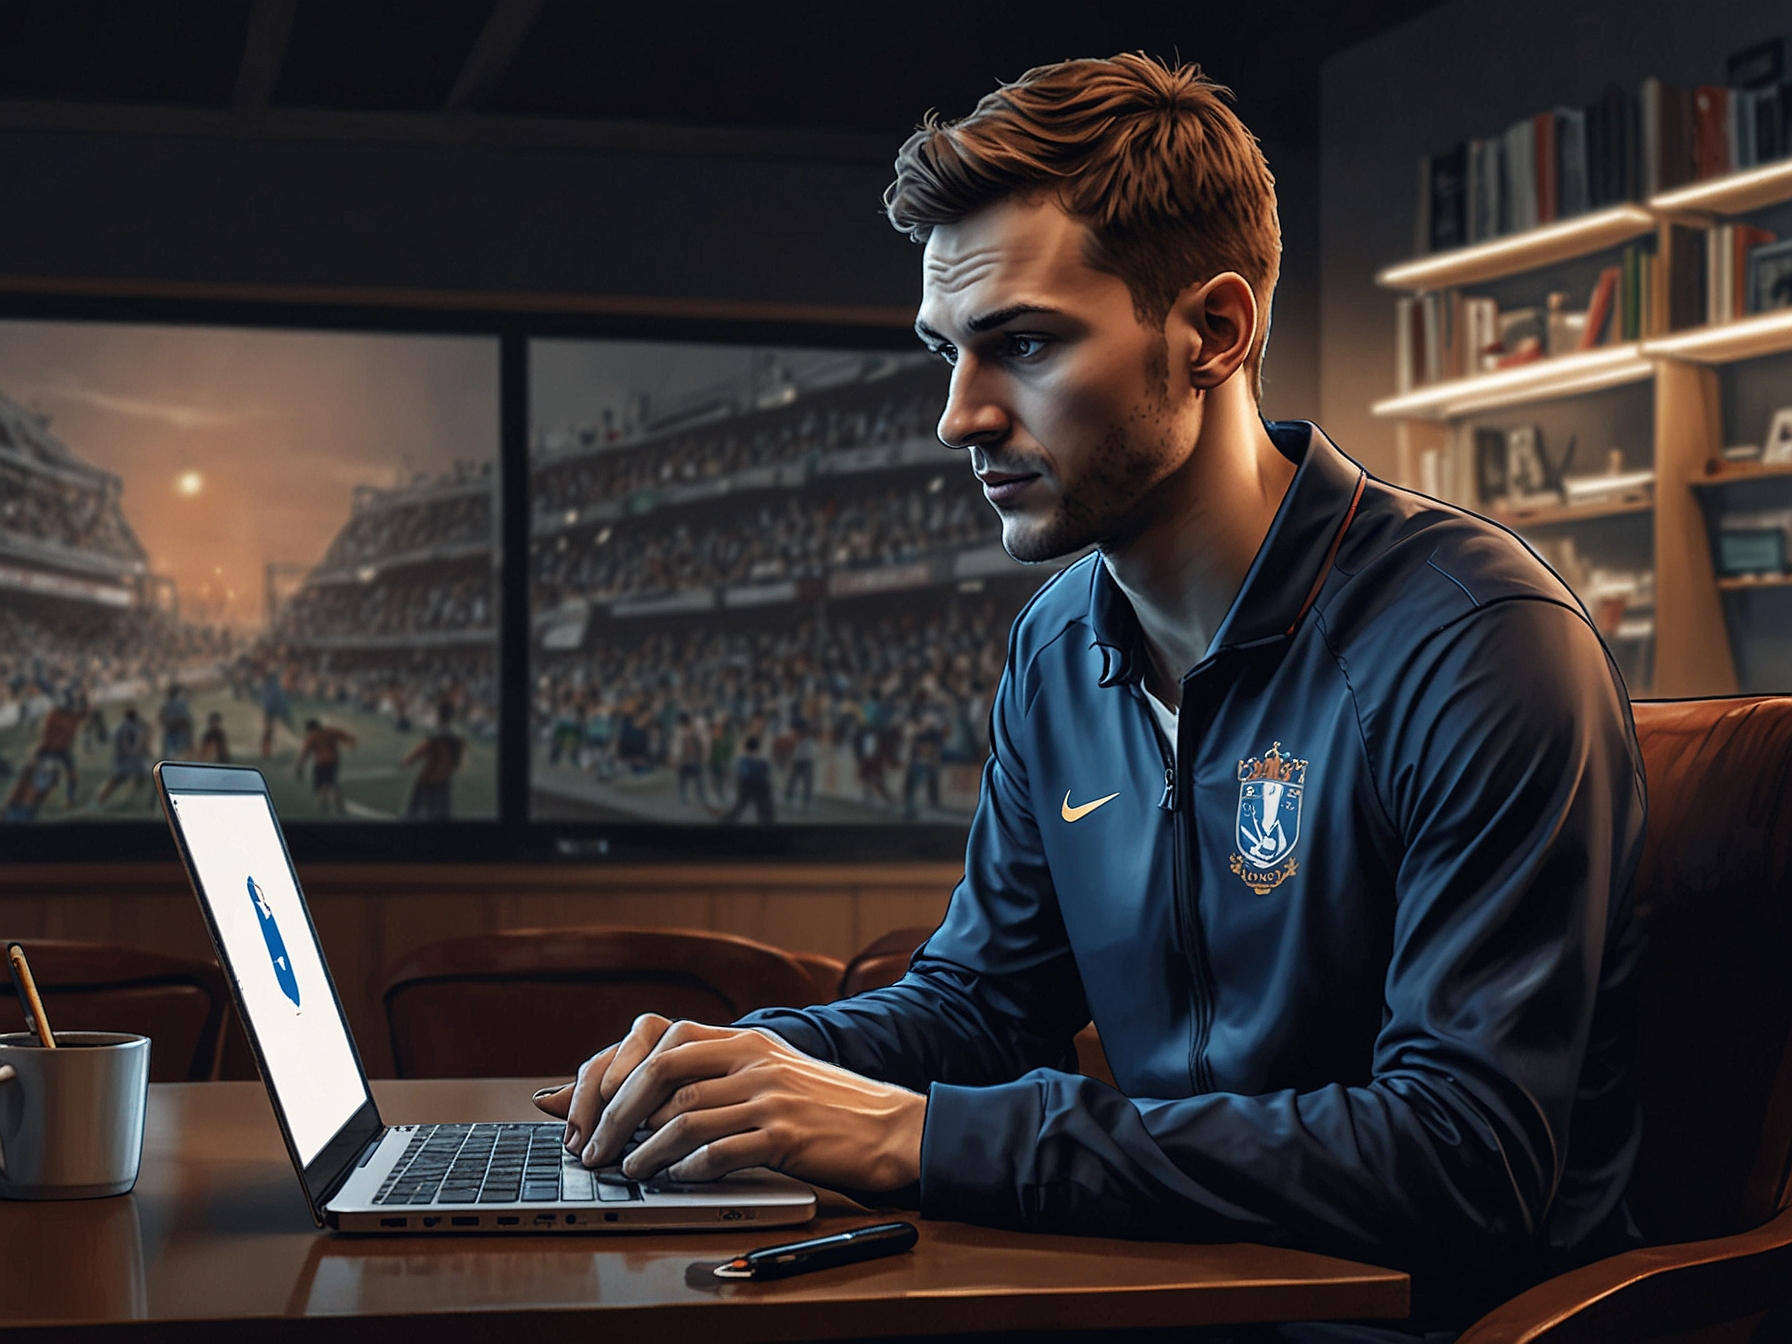 Illustration of a person using a laptop to stream the Netherlands vs France game, utilizing a VPN service to bypass geographical restrictions and access the match online.